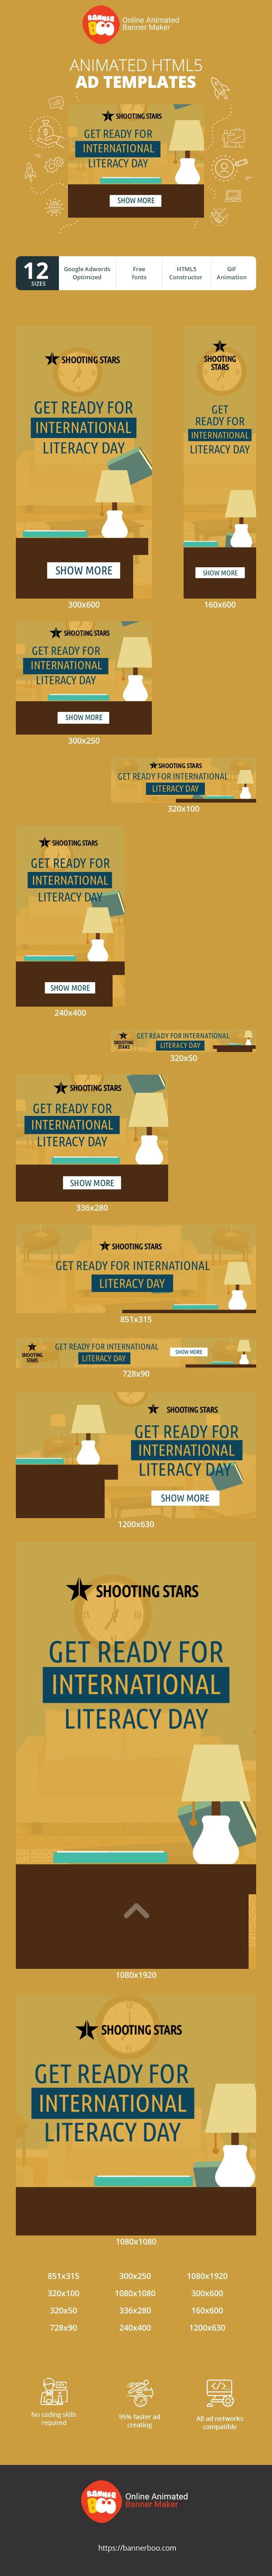 Banner ad template — Get Ready For International Literacy Day —Falling Books